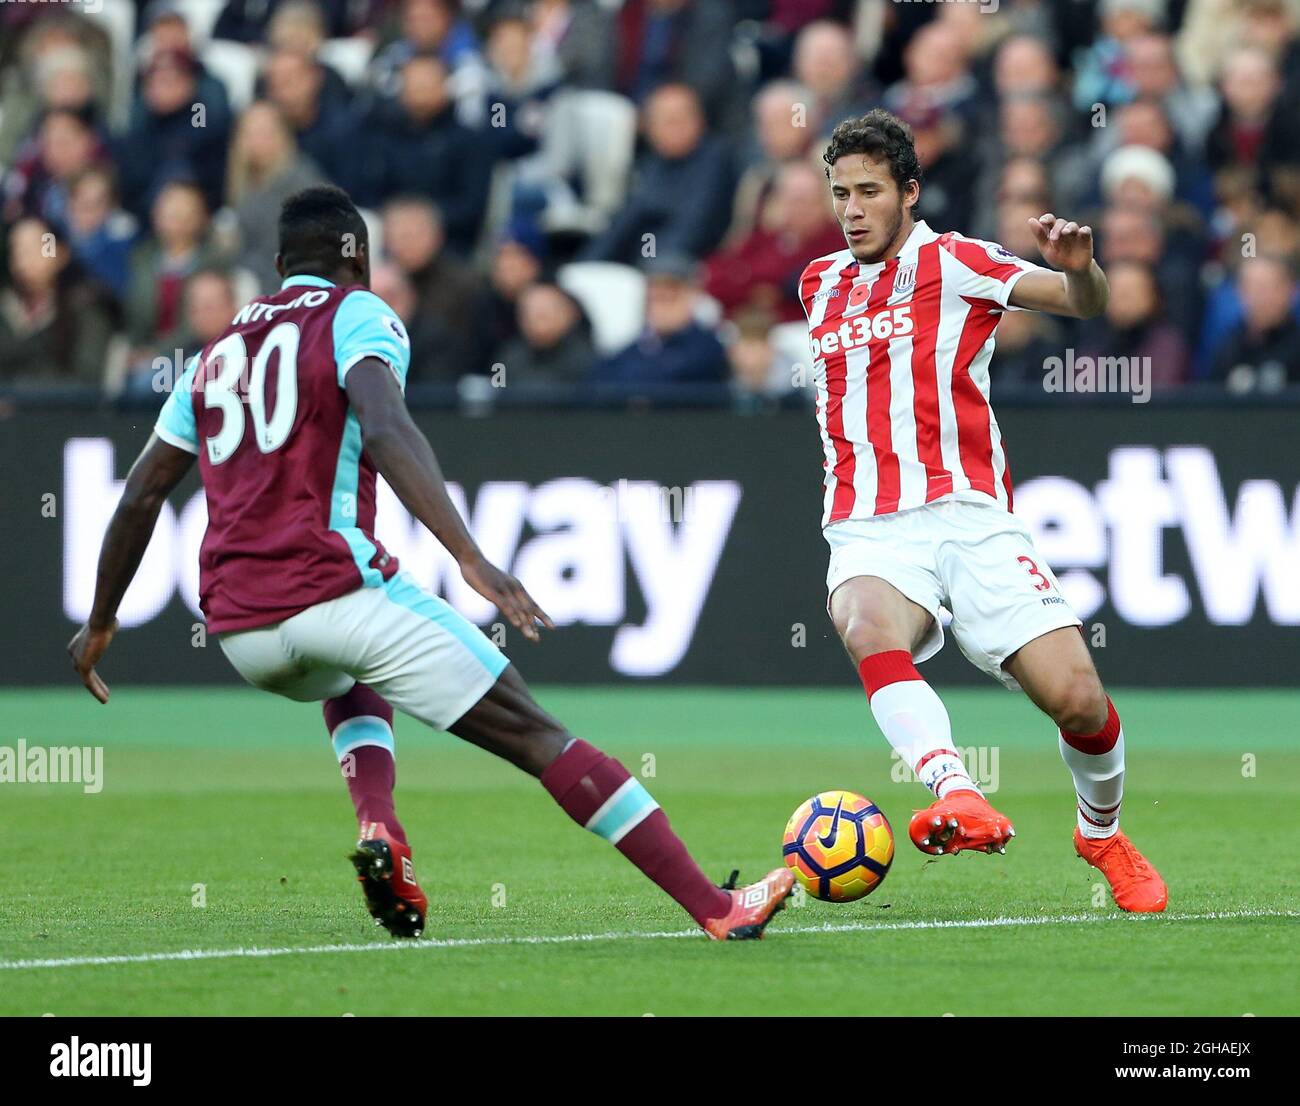 Stoke's Ramadan Sobhi in action during the Premier League match at the London Stadium, London. Picture date November 5th, 2016 Pic David Klein/Sportimage via PA Images Stock Photo